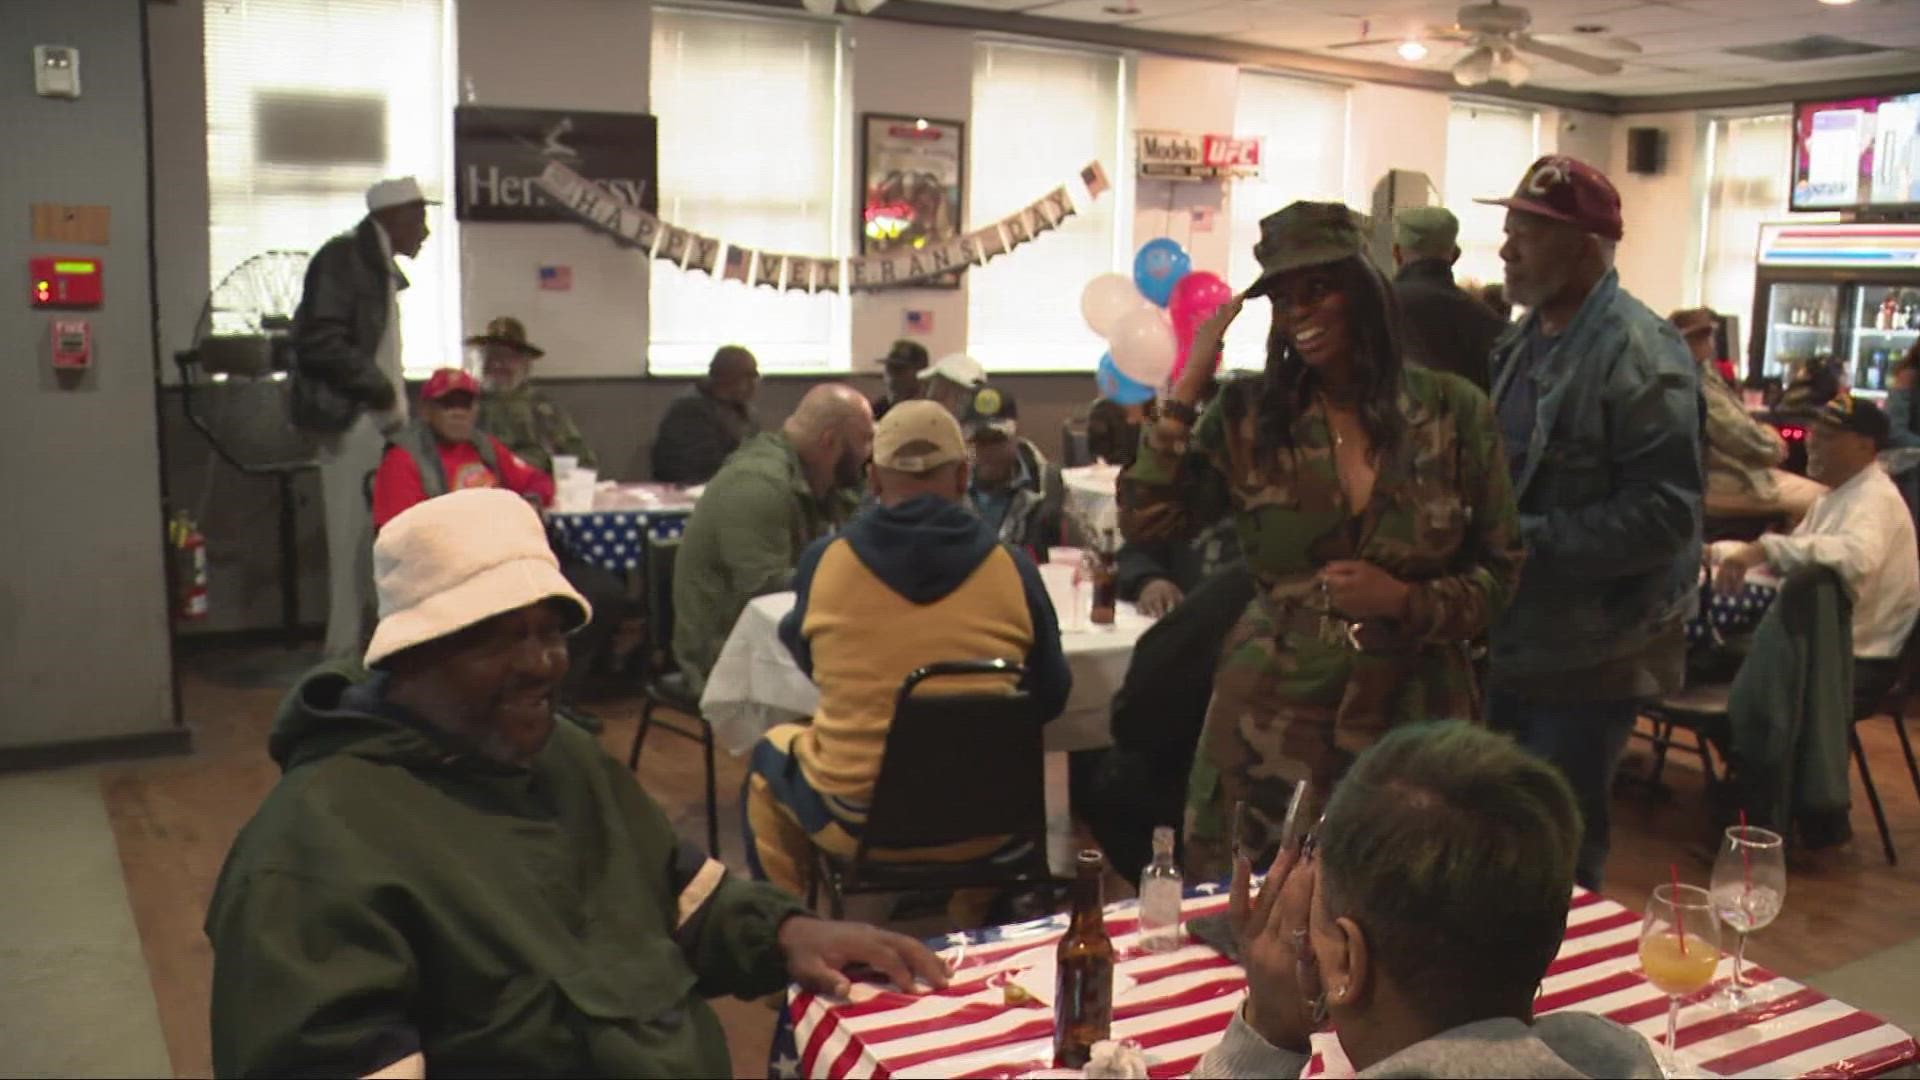 Owner Tamone Calloway says feeding veterans is the least he can do to say 'thank you.'